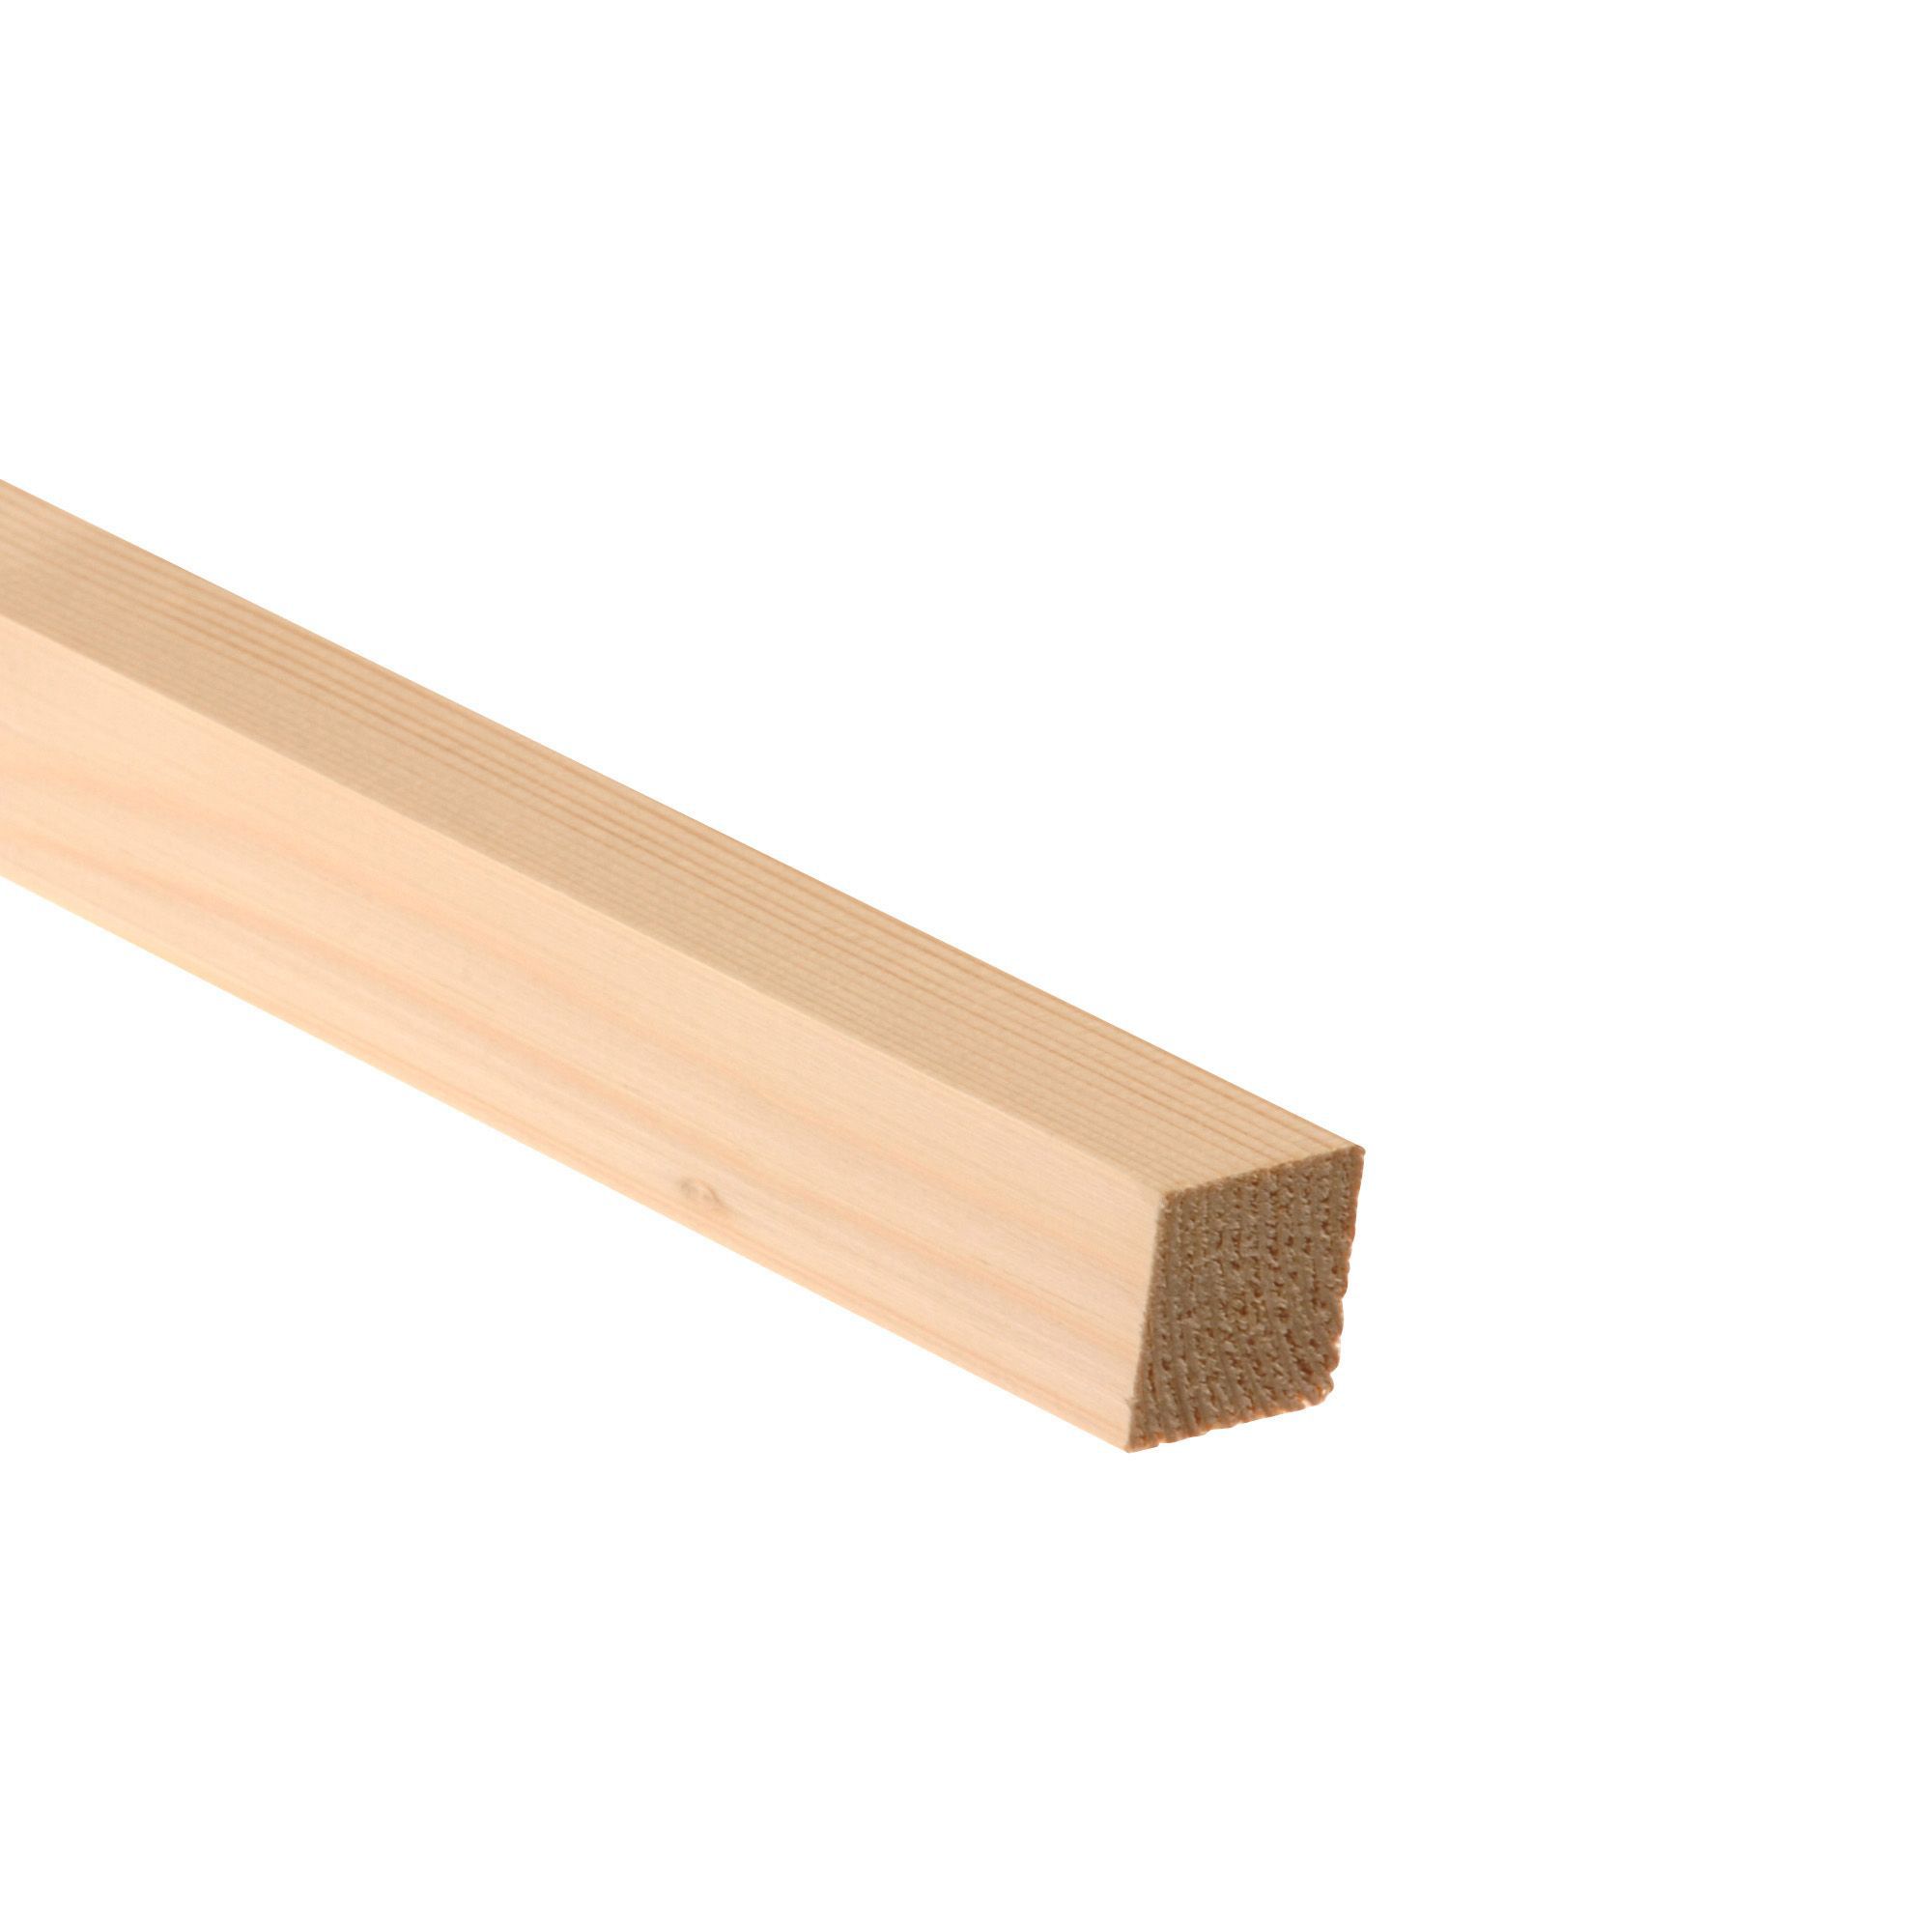 Smooth Planed Square edge Stick timber (L)2.4m (W)34mm (T)34mm, Pack of 12